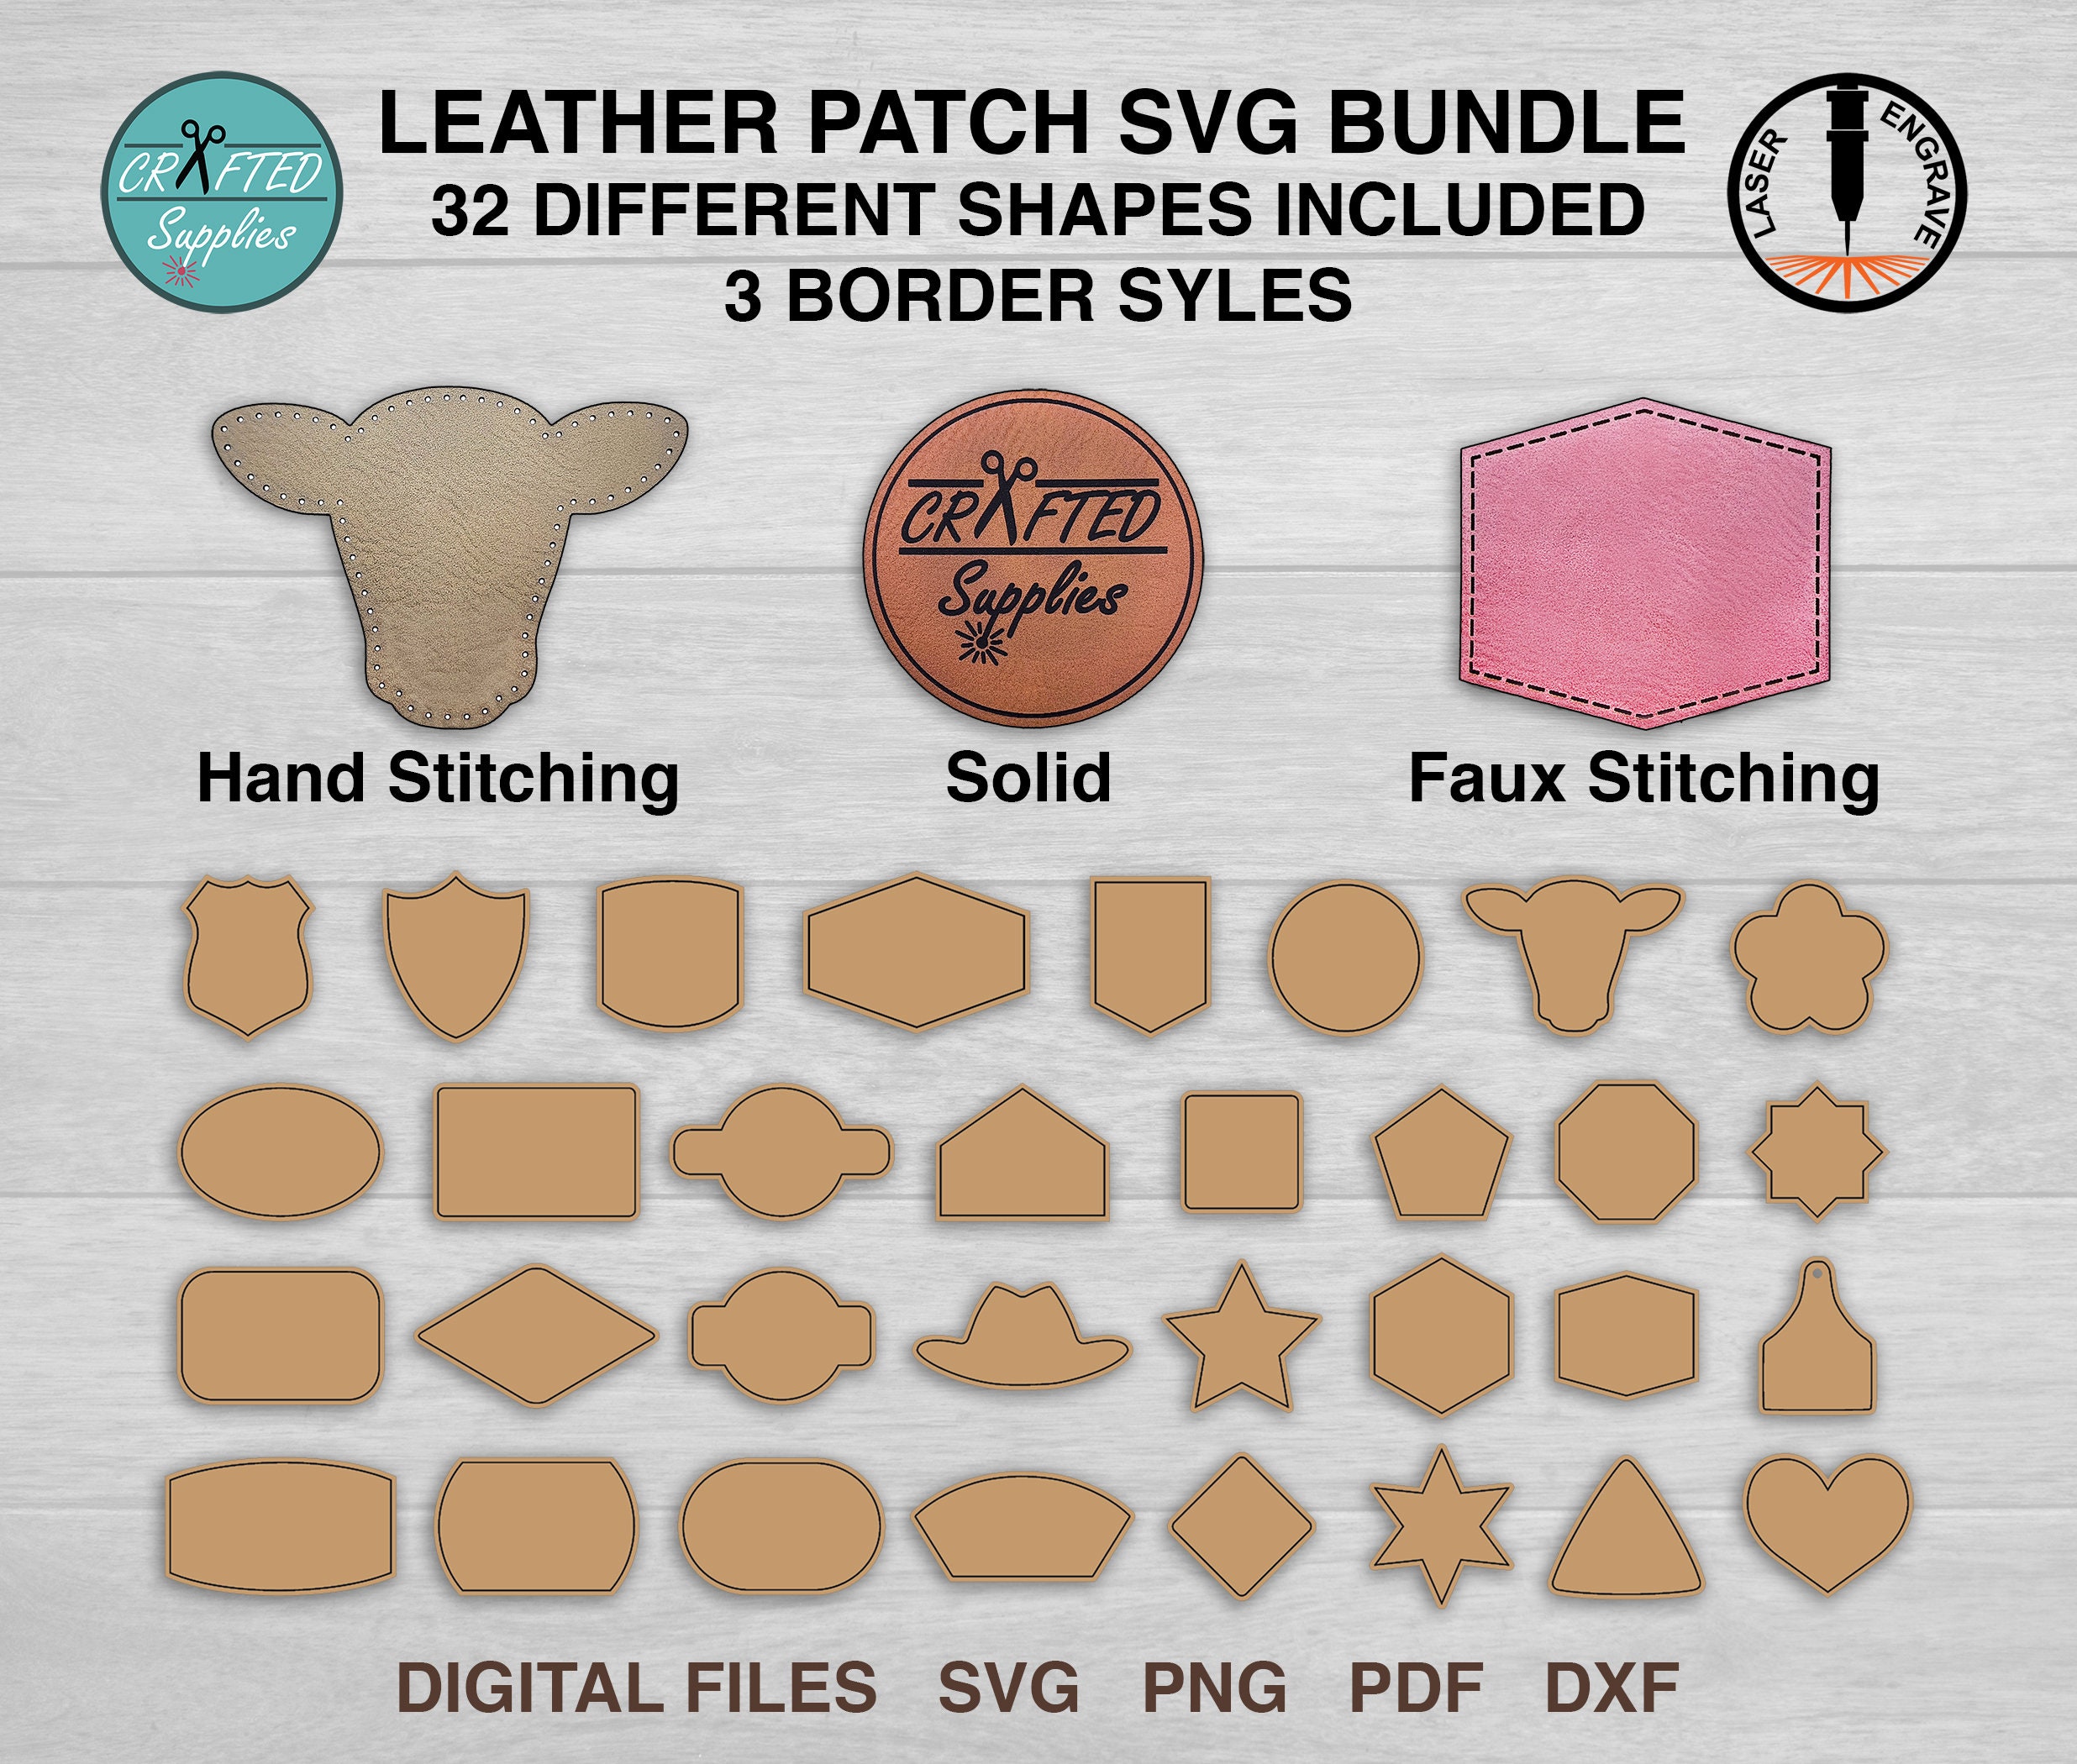 Leatherette Patch, SM Square 2.5 in x 2.5 in